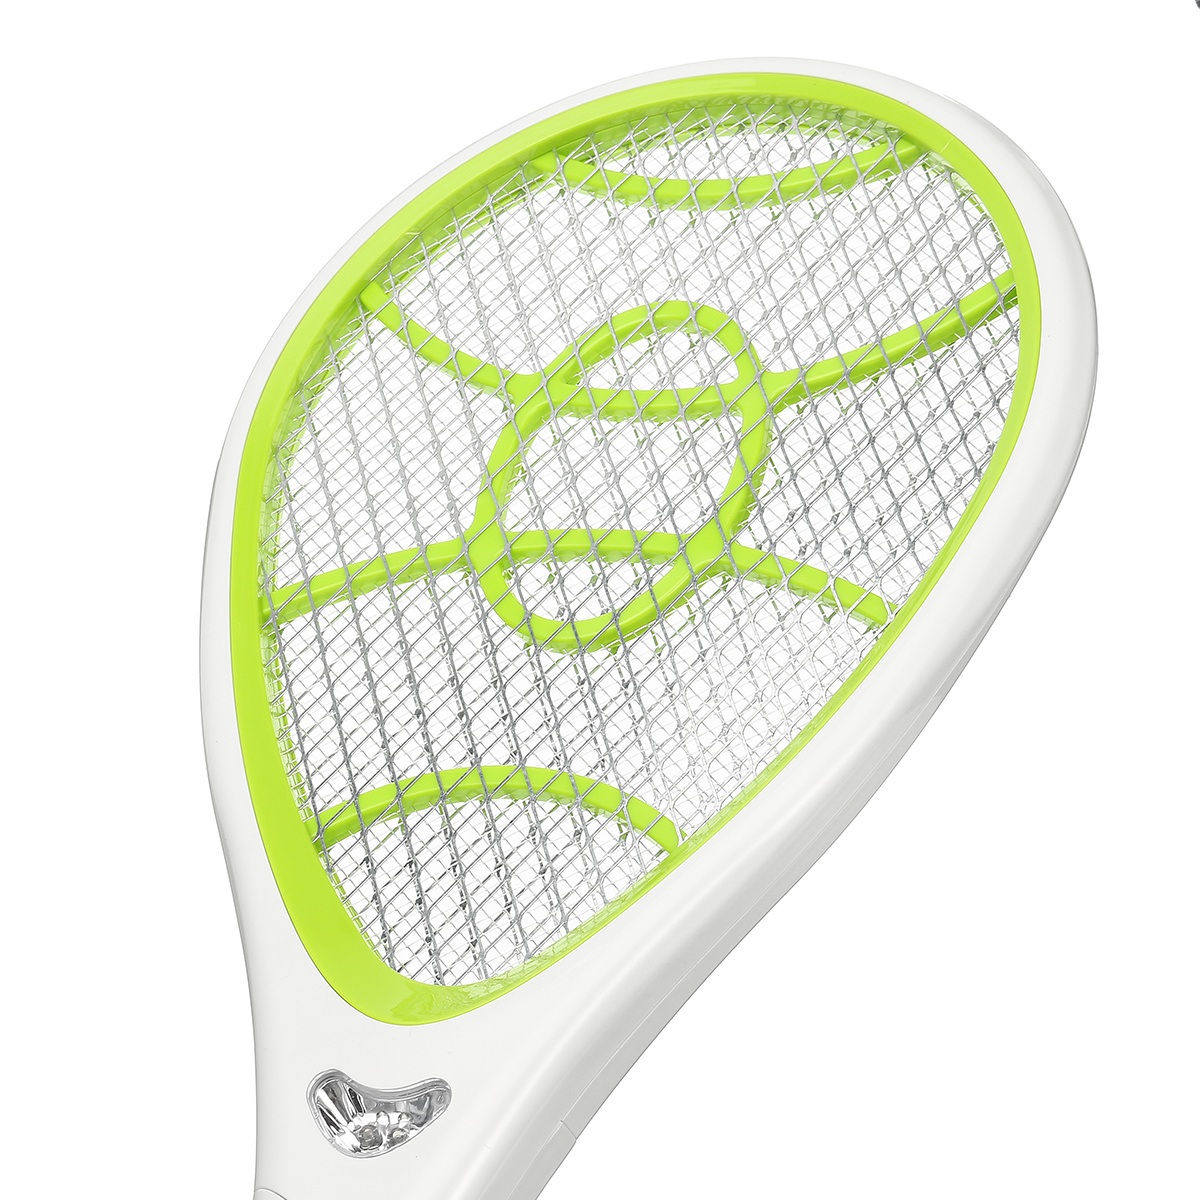 Cordless-Handheld-Bug-Zapper-Electric-Racket-Mosquito-Dispeller-Fly-Insect-Swatter-Killer-1437419